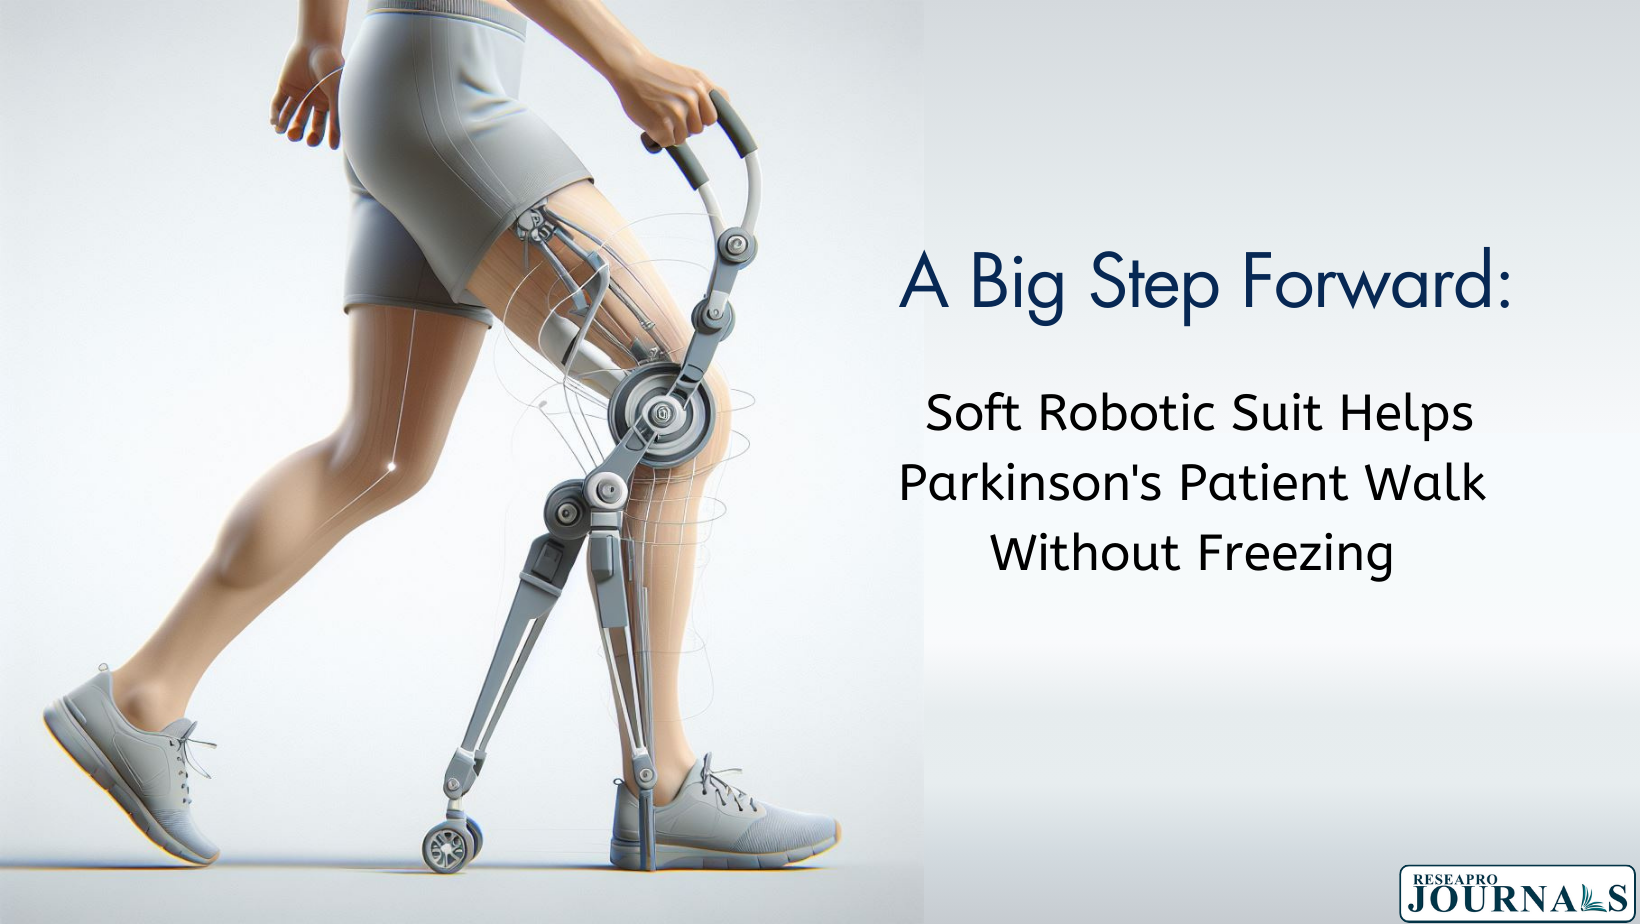 Wearable Robot Gives Hope to Parkinson’s Patients